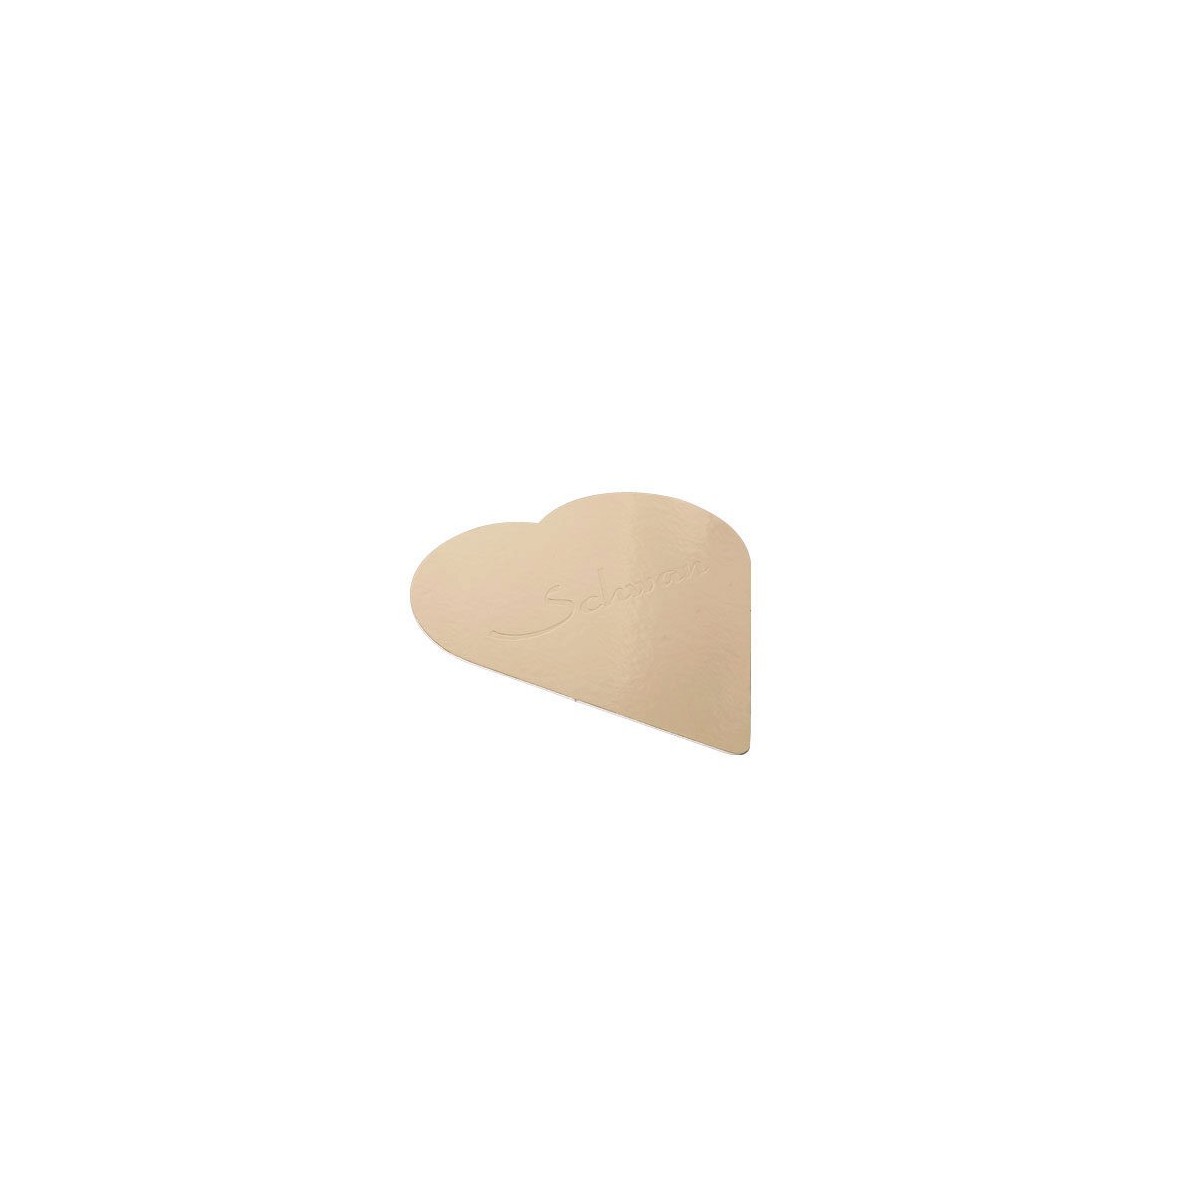 CAKE BOARD HEART GOLD 18 CM 25 PIECES FOSTPLUS INCLUDED  PACKAGE